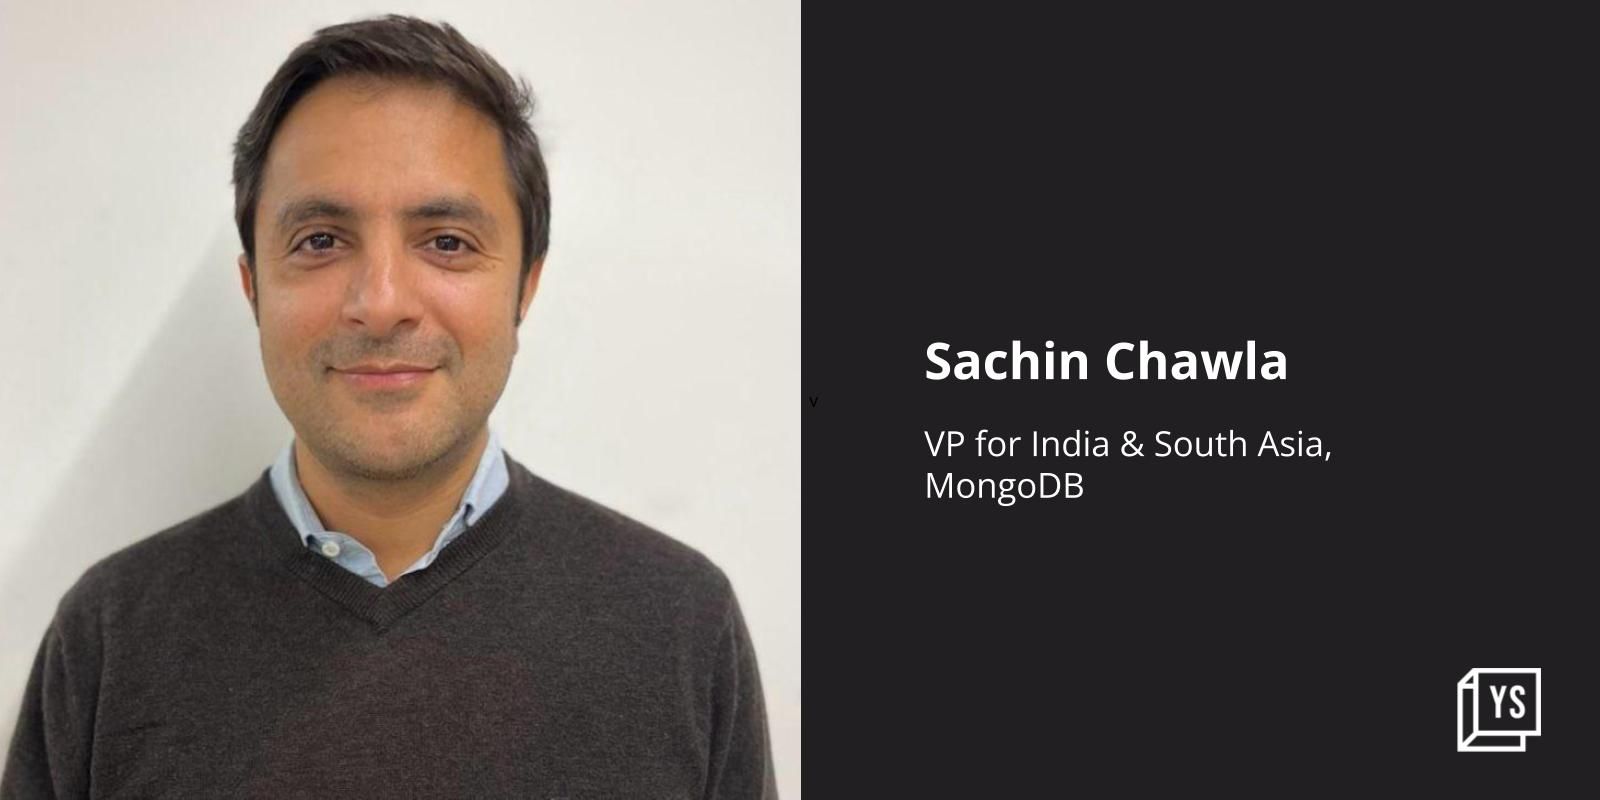 We are just getting started: MongoDB’s Sachin Chawla on building solutions for India
